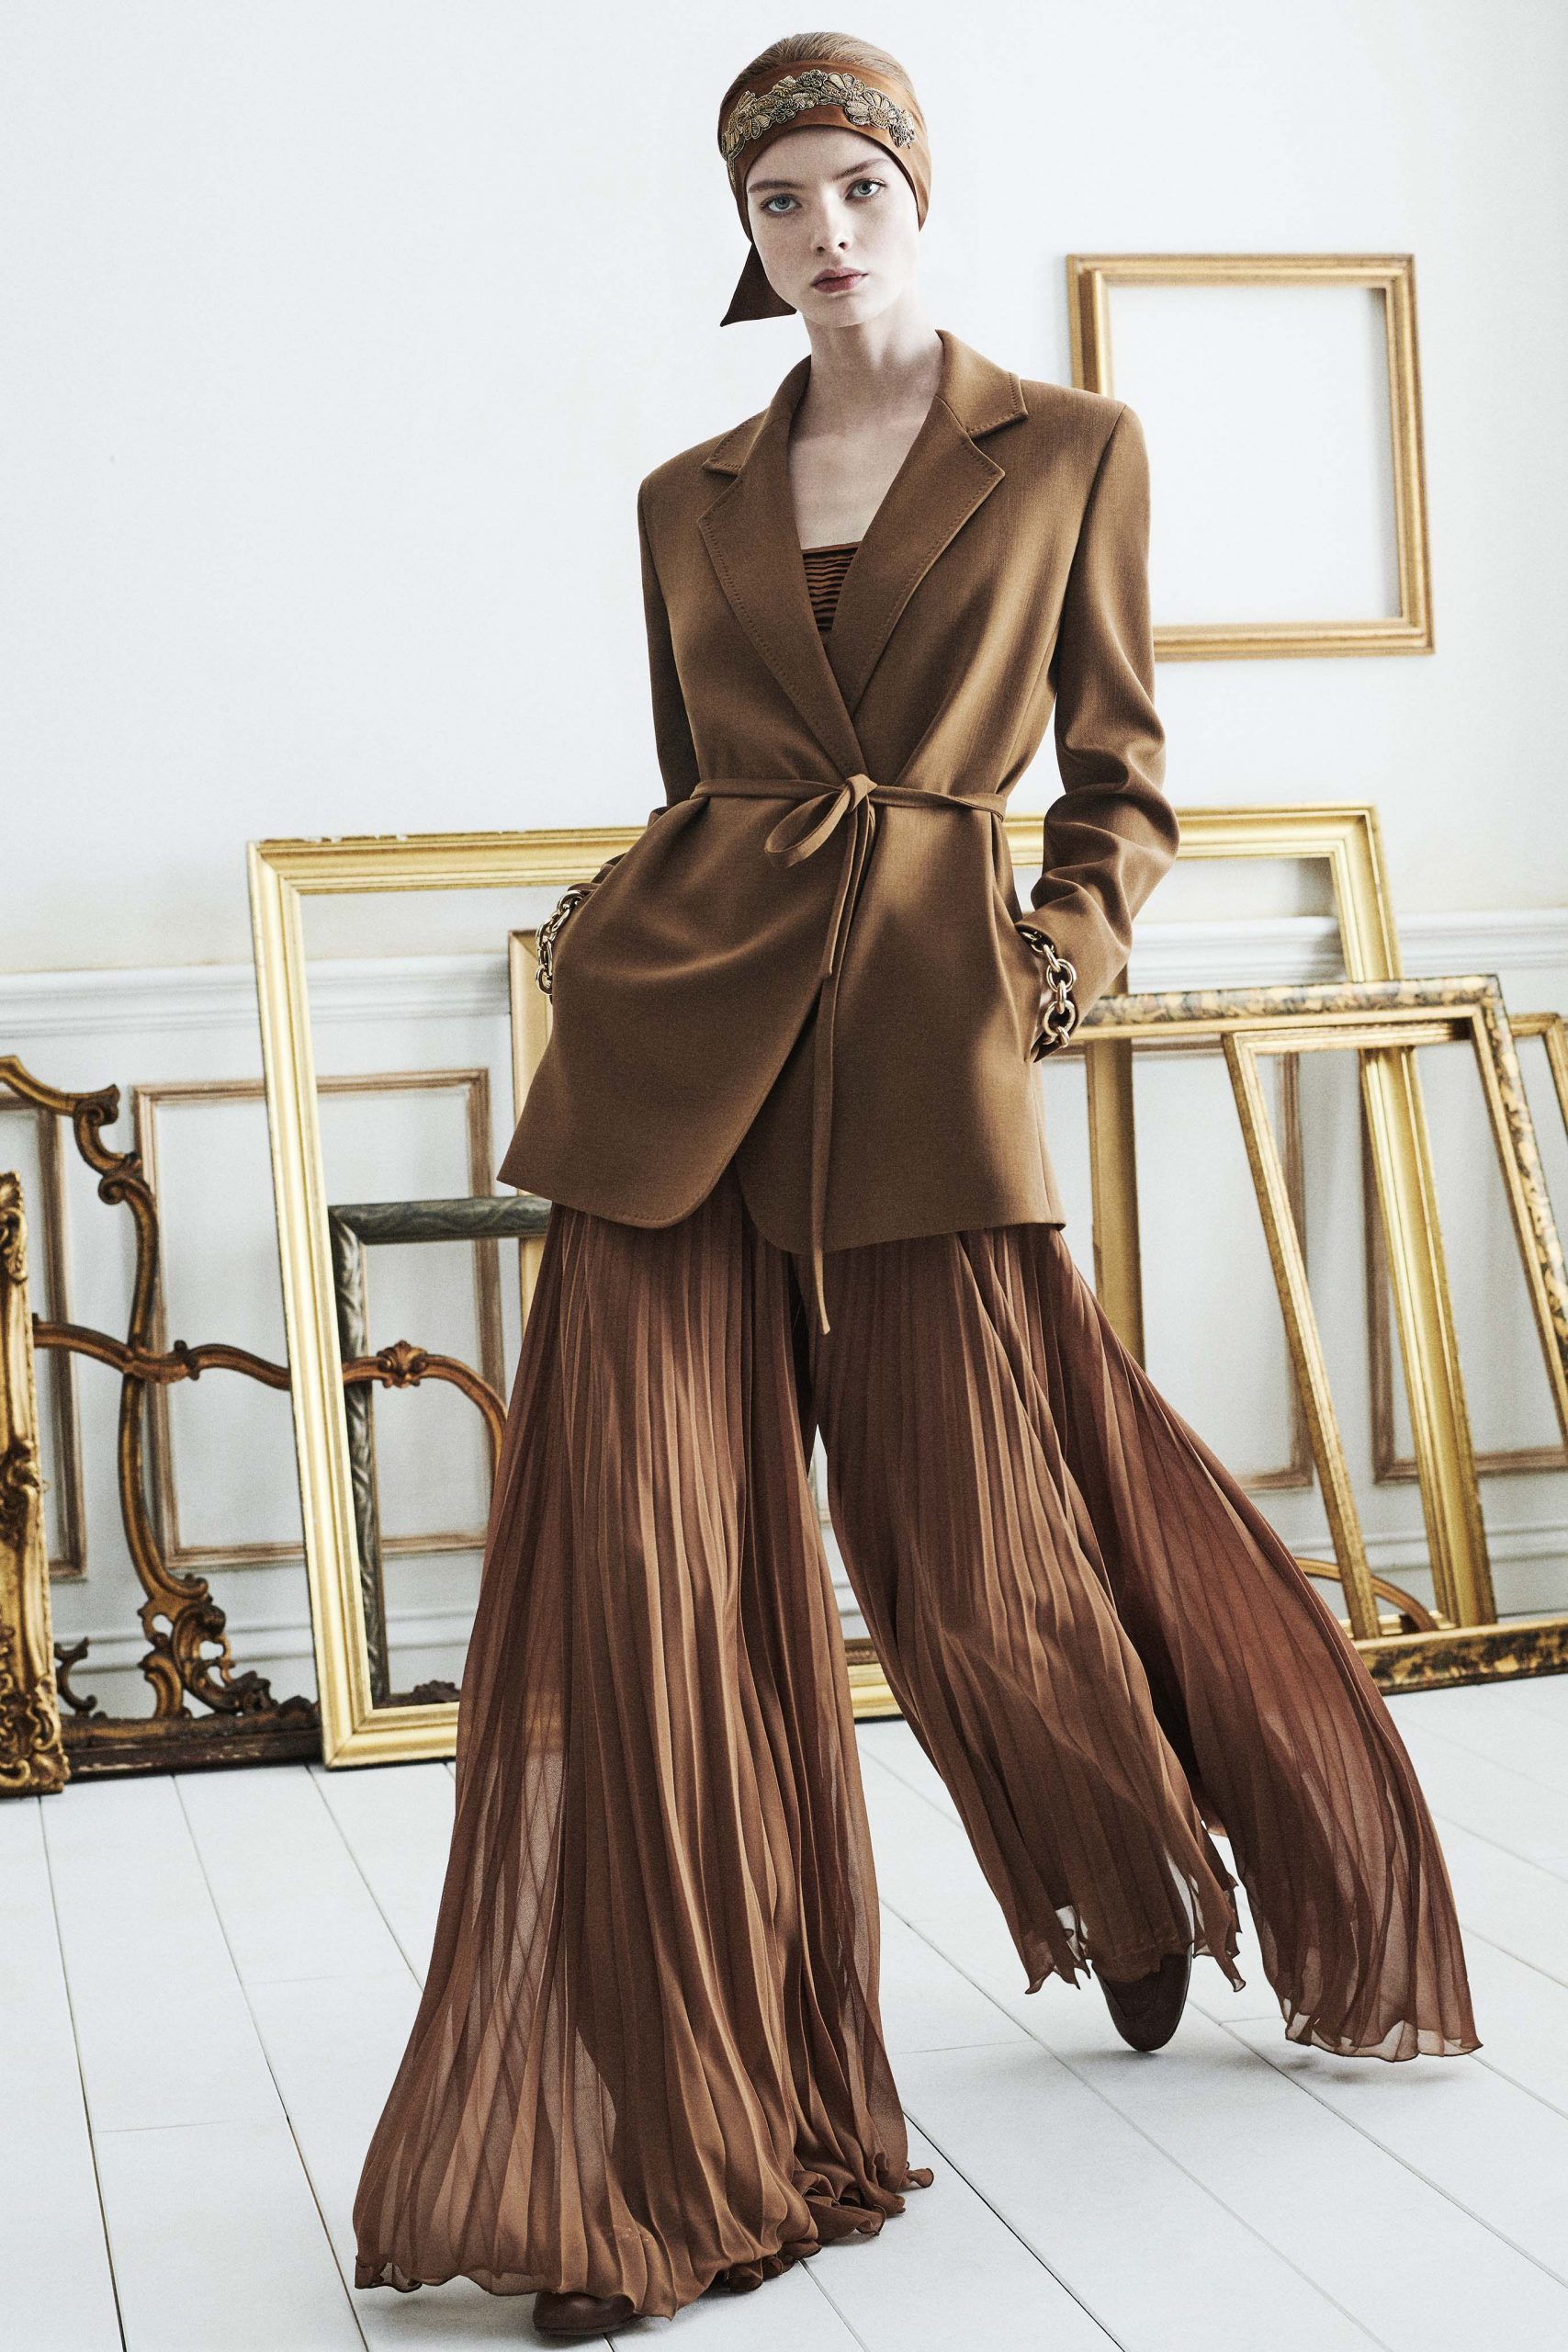 Max Mara Resort 2021 Collection - DiL Fashion Group